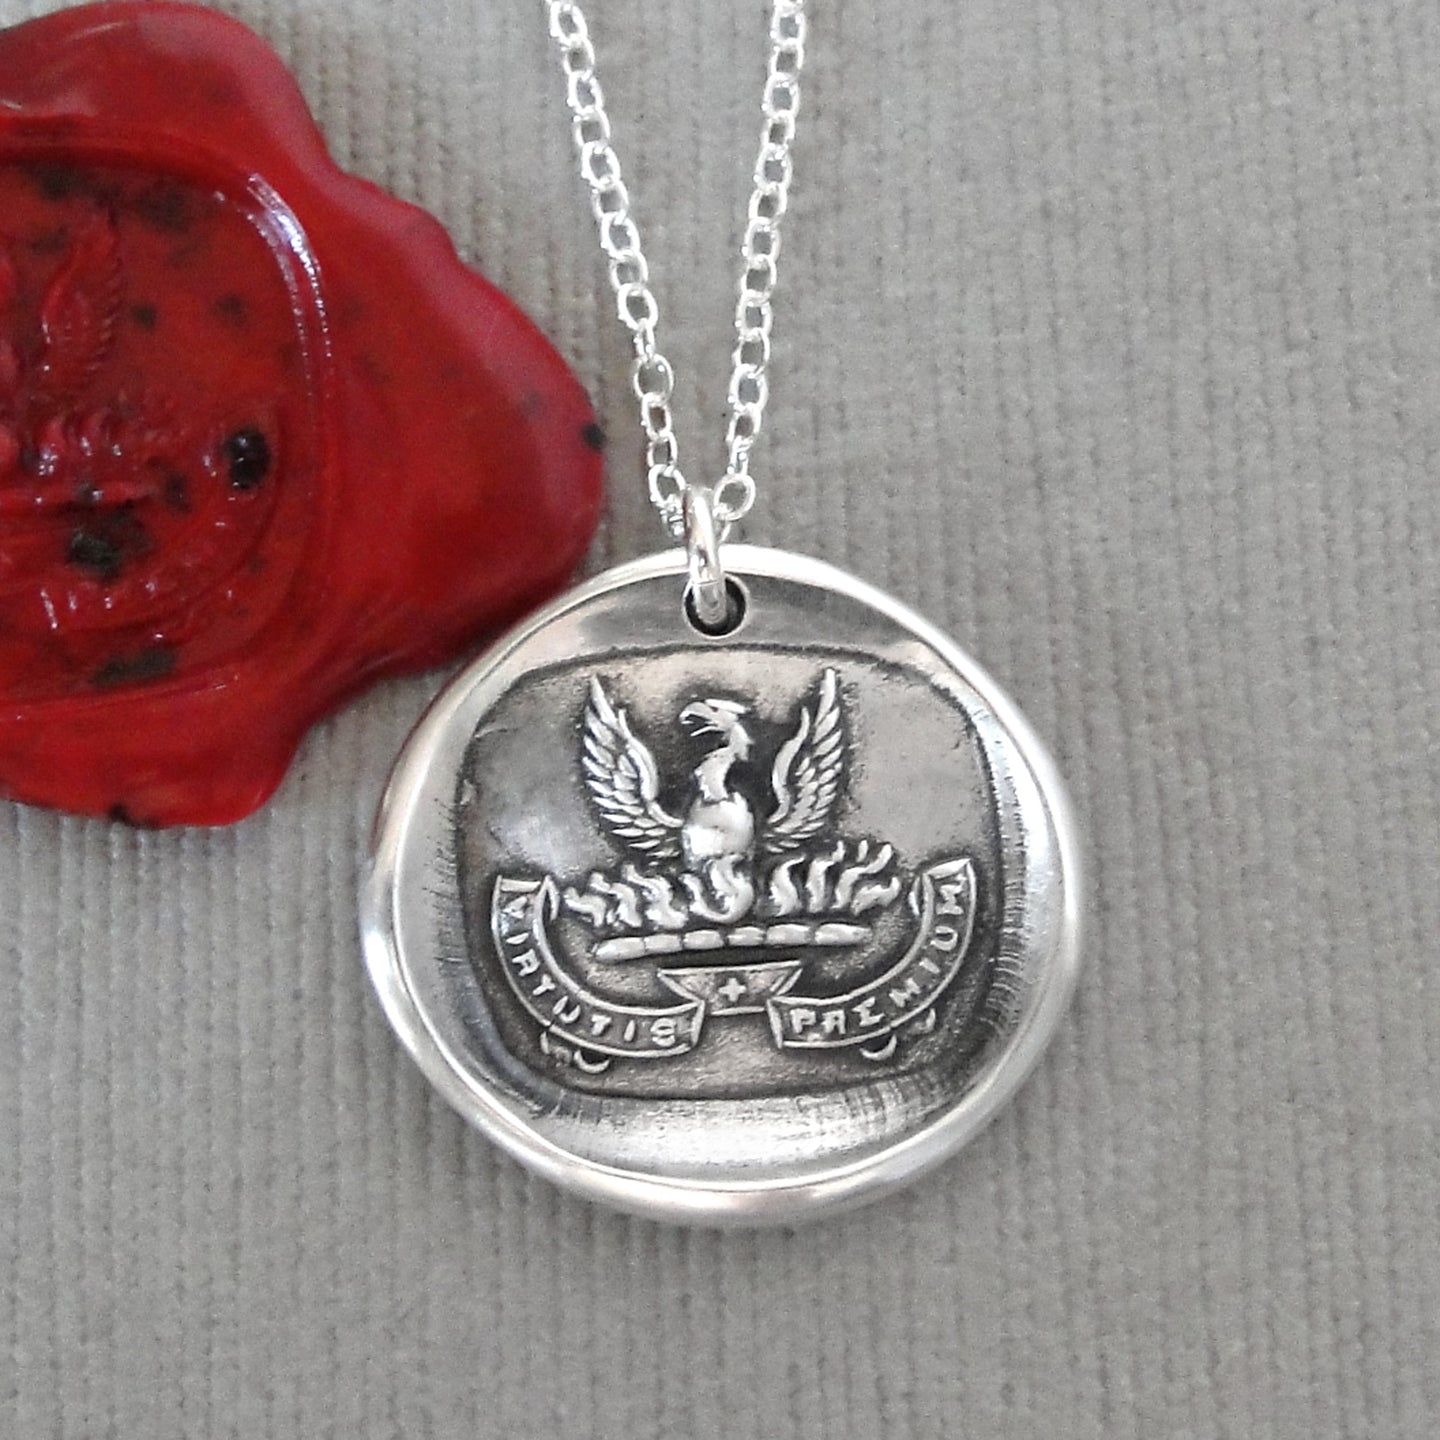 Phoenix Wax Seal Necklace - Courage And Its Reward Antique Silver Wax Seal Charm Jewelry